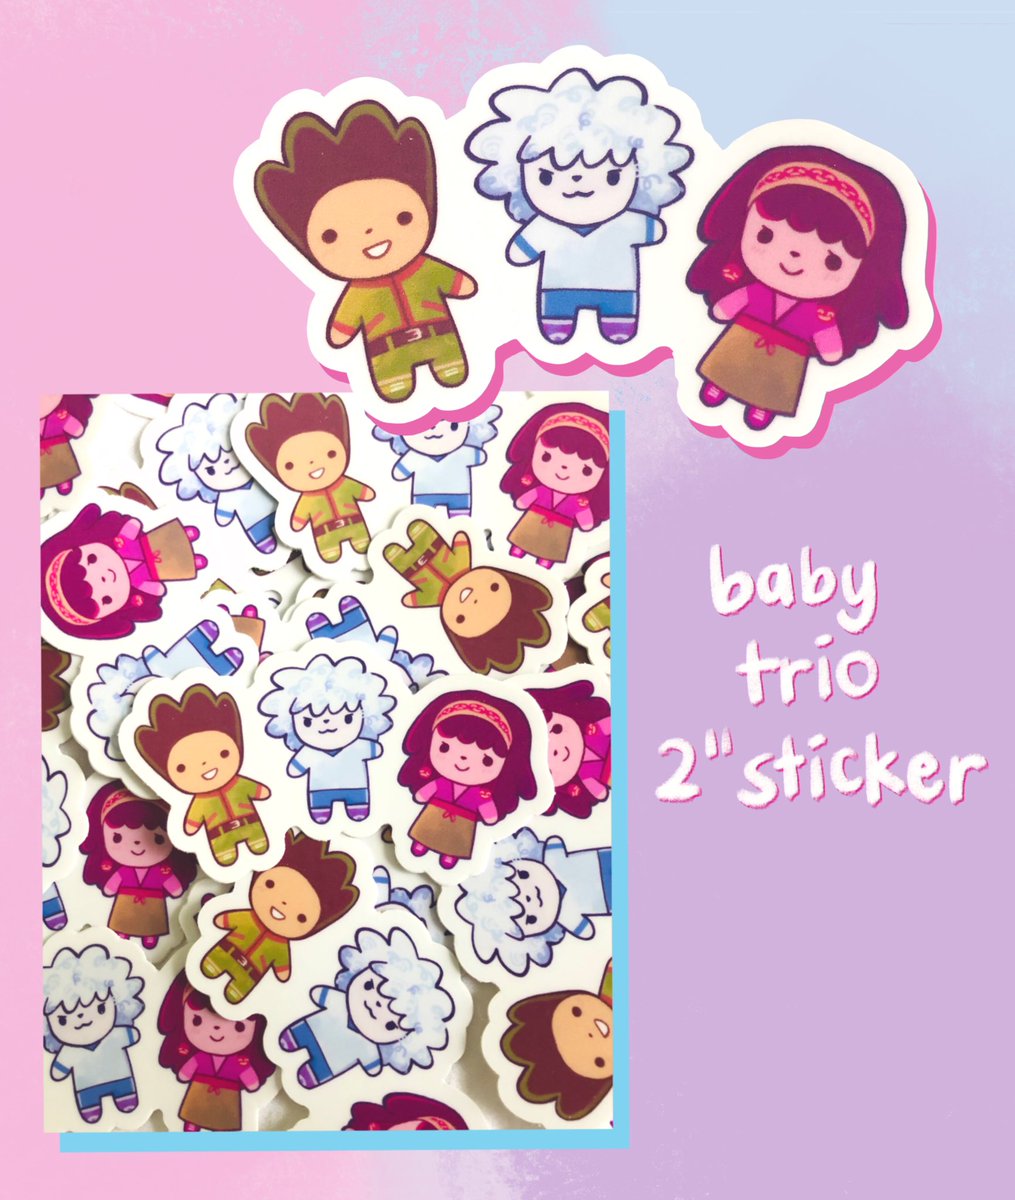 hi everyone!! I made stickers of some of my favorite draws ?? #hxh

[RT appreciated ?] 